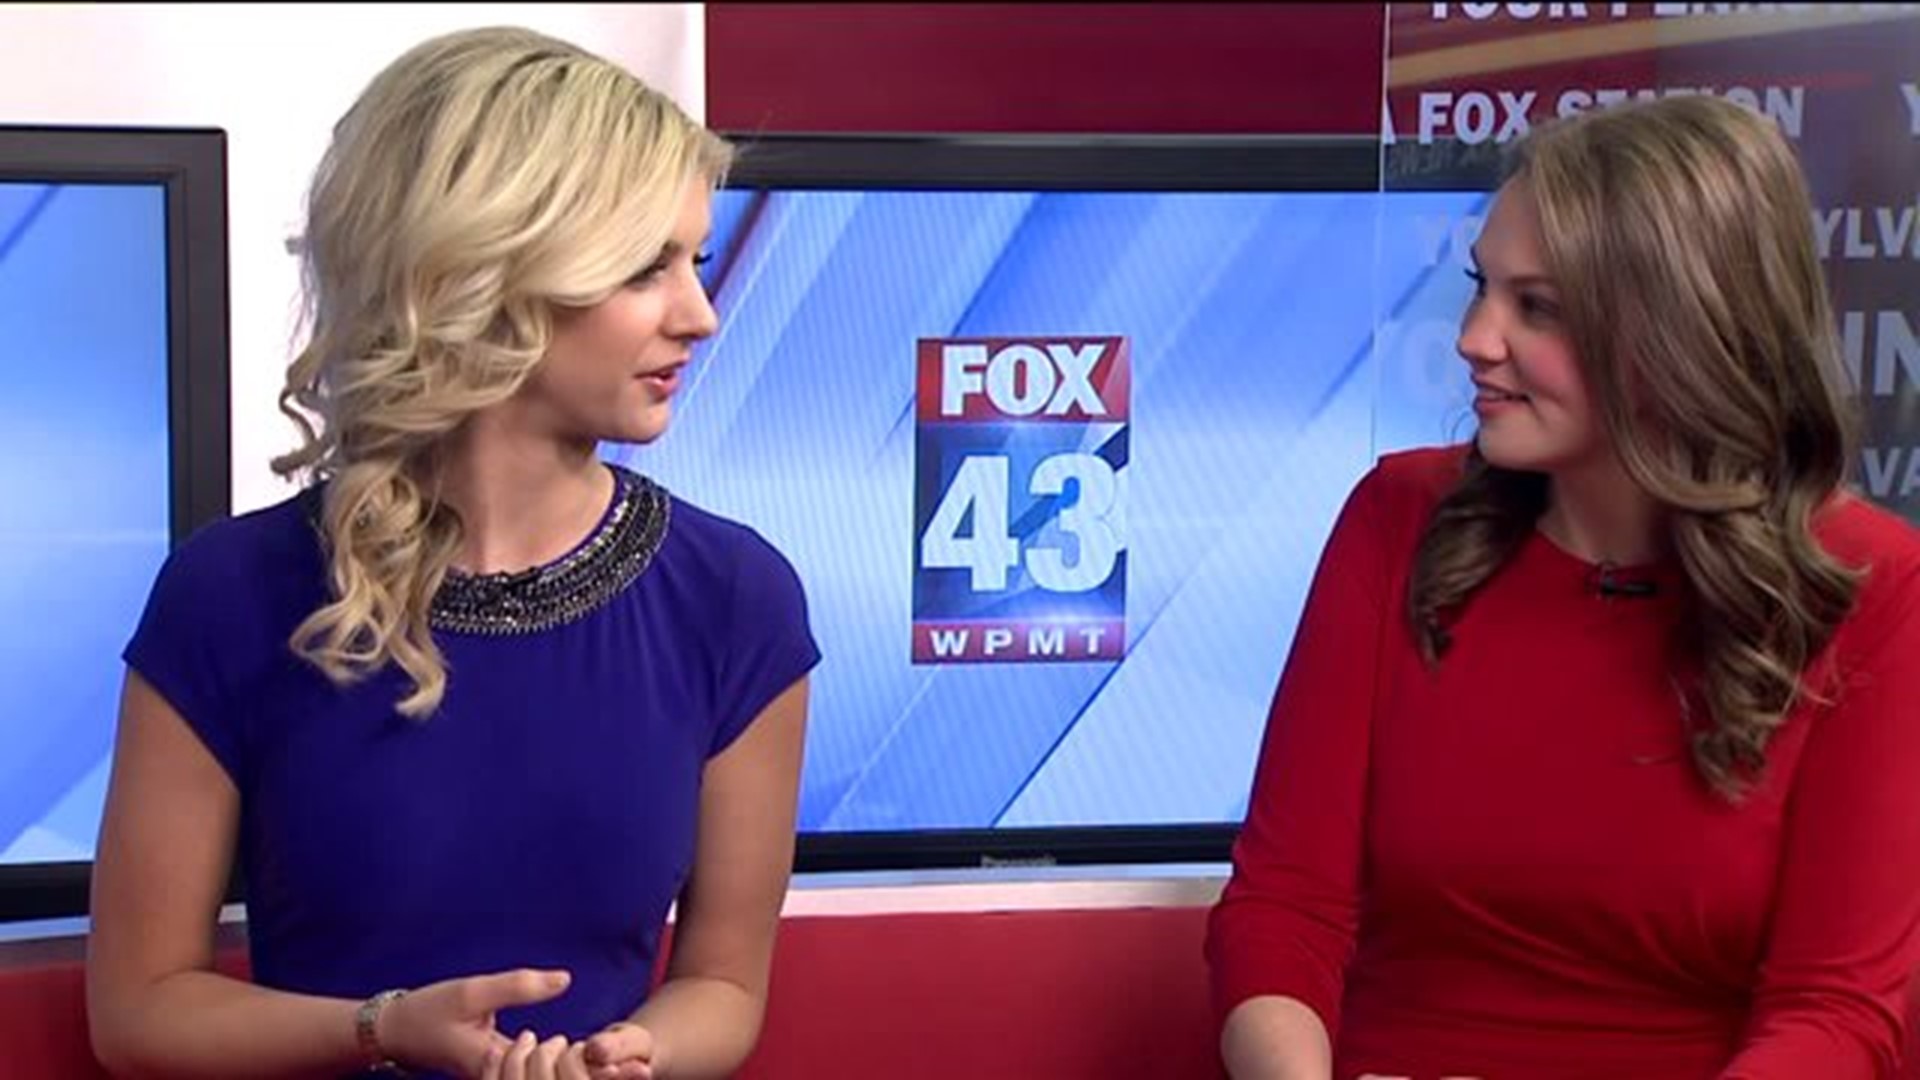 Meet the newest members of the Fox 43 team